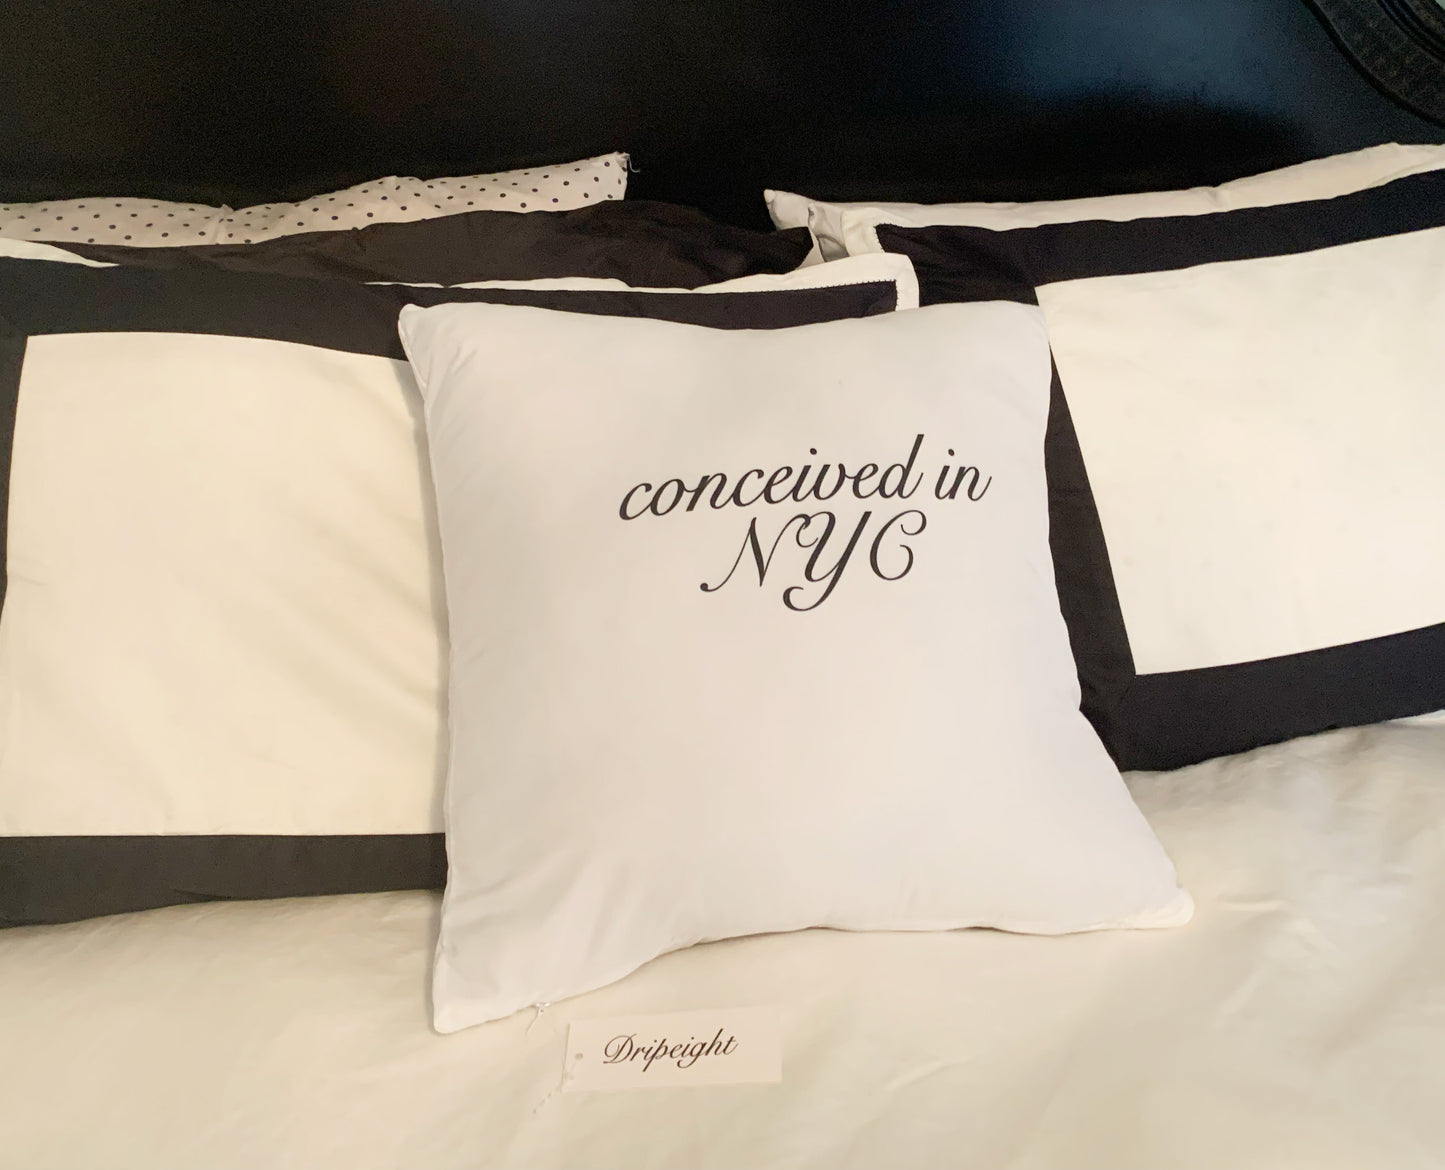 conceived in nyc throw pillow case 18"x18"